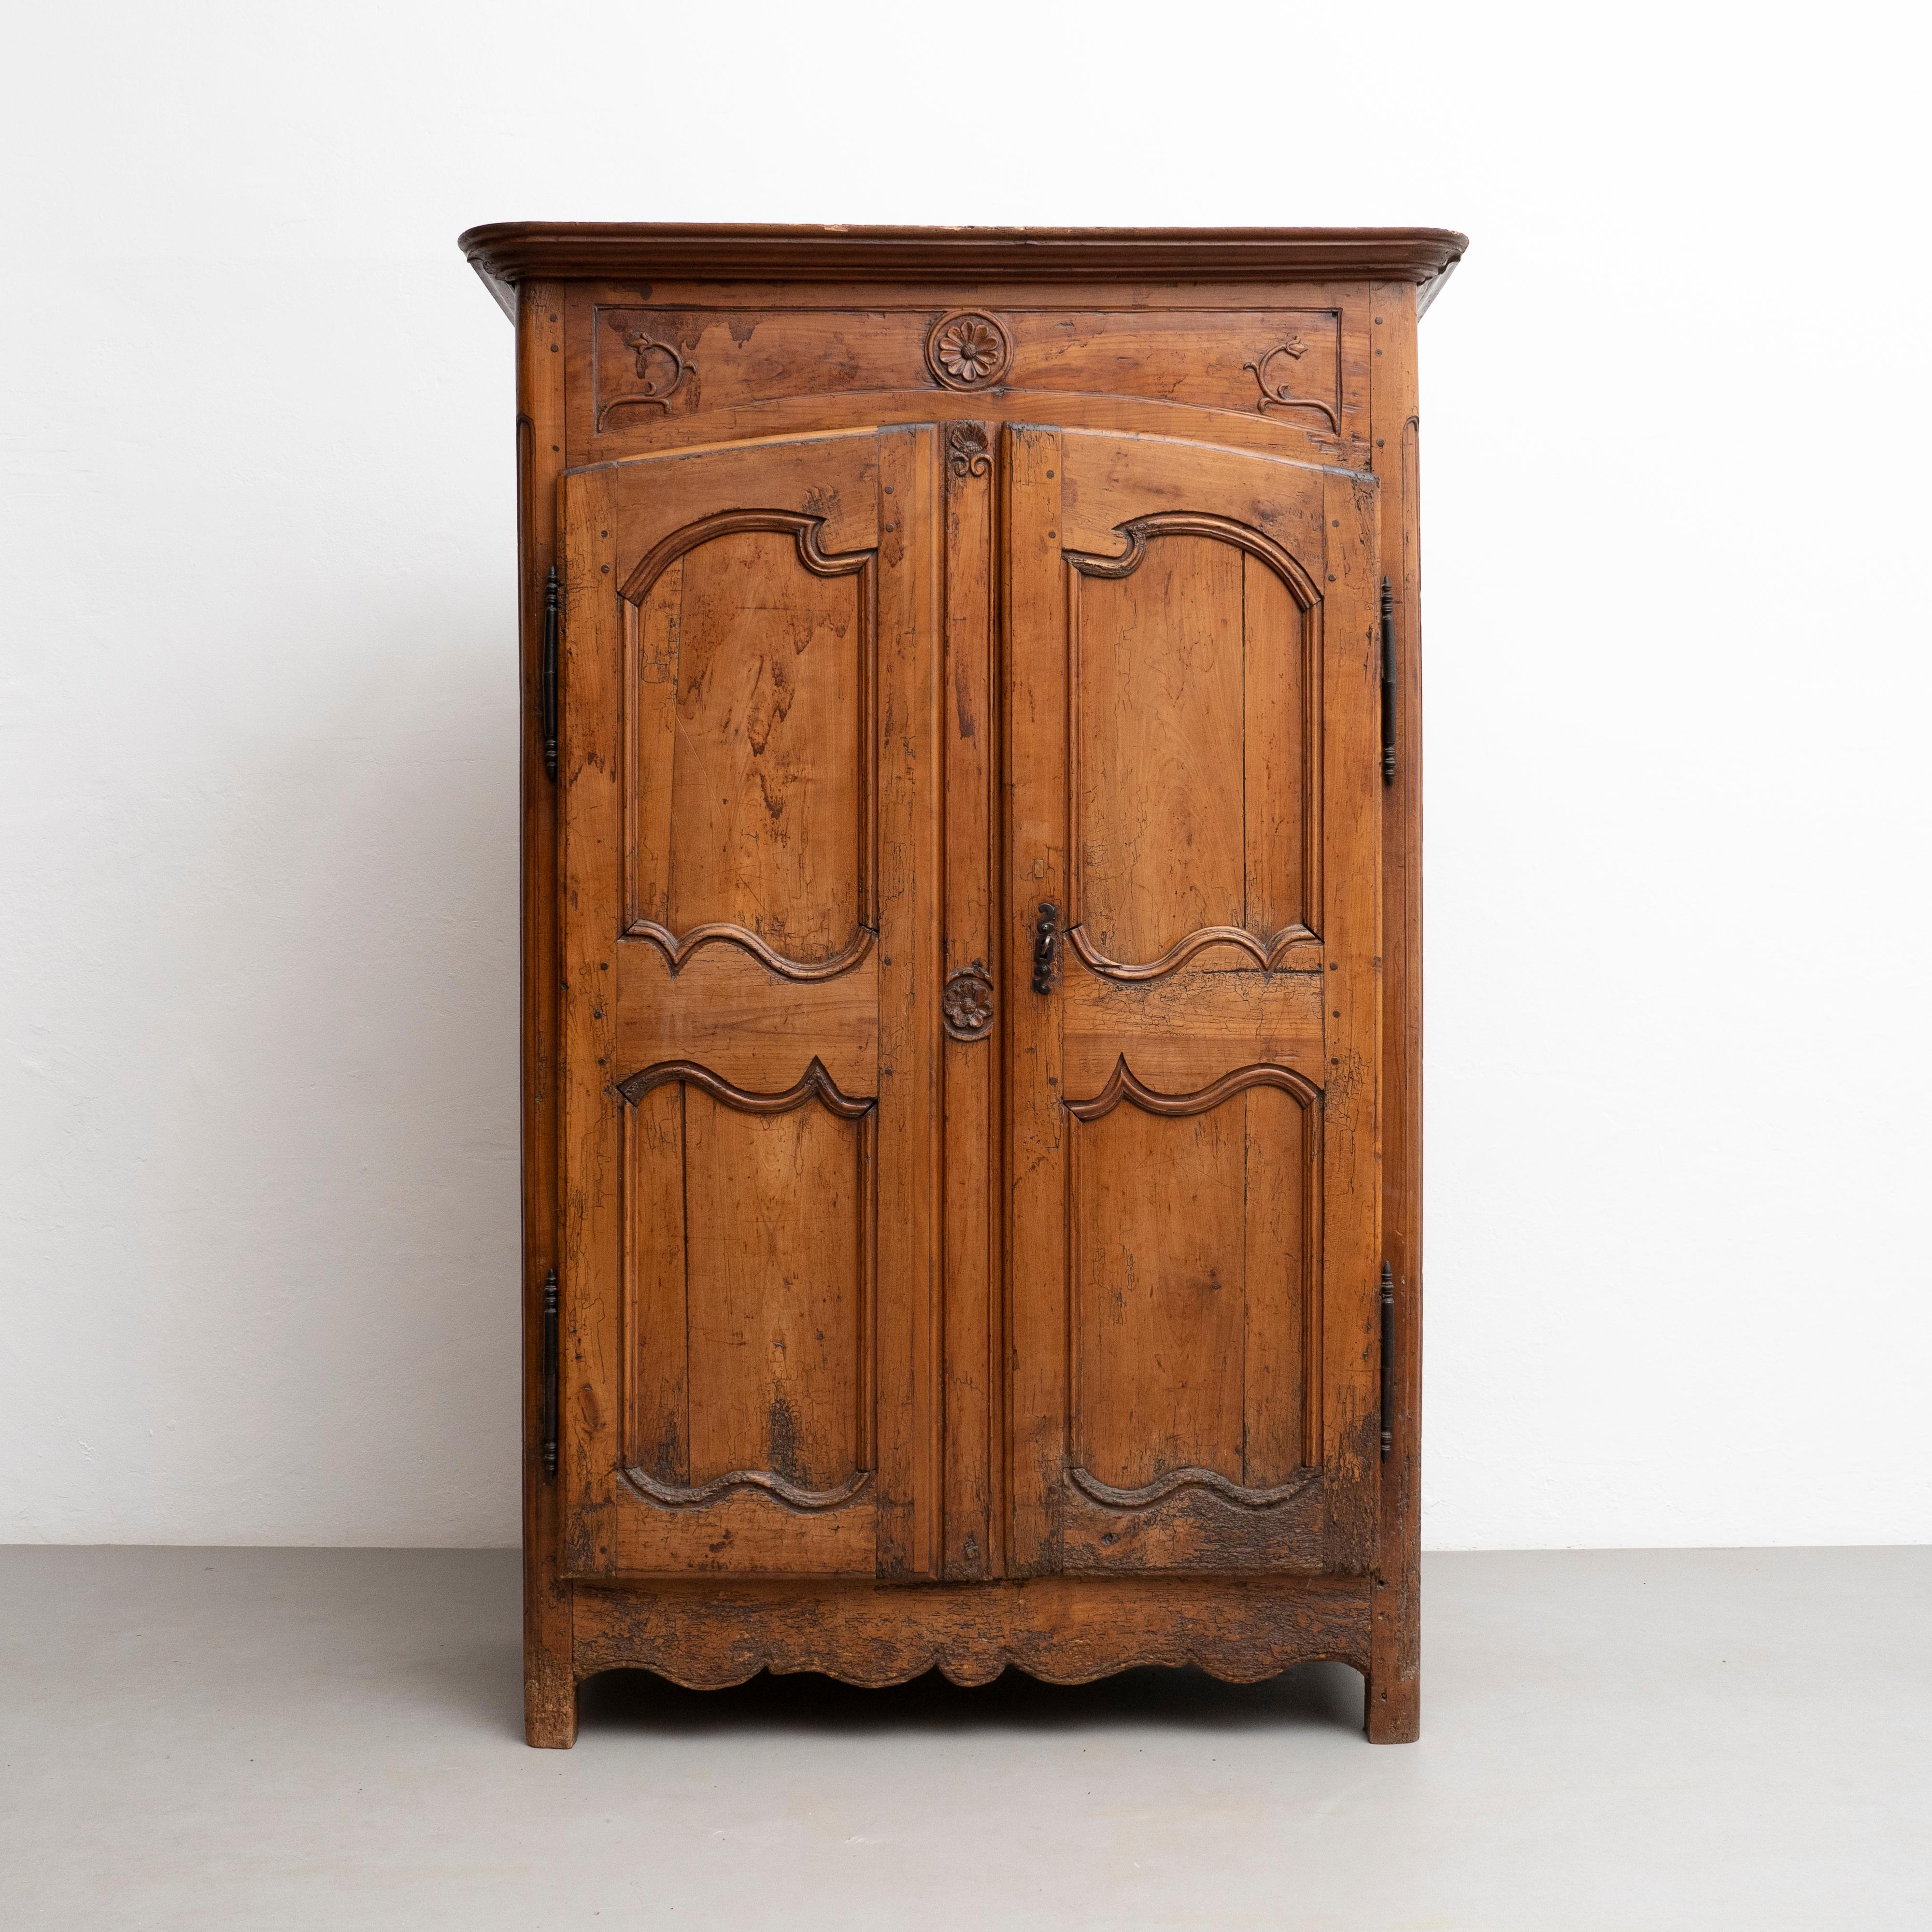 Traditional rustic wood dresser.

Made by unknown artisan from Spain, circa 1930.

In original condition, with minor wear consistent with age and use, preserving a beautiful patina.

Material:
Wood.
 